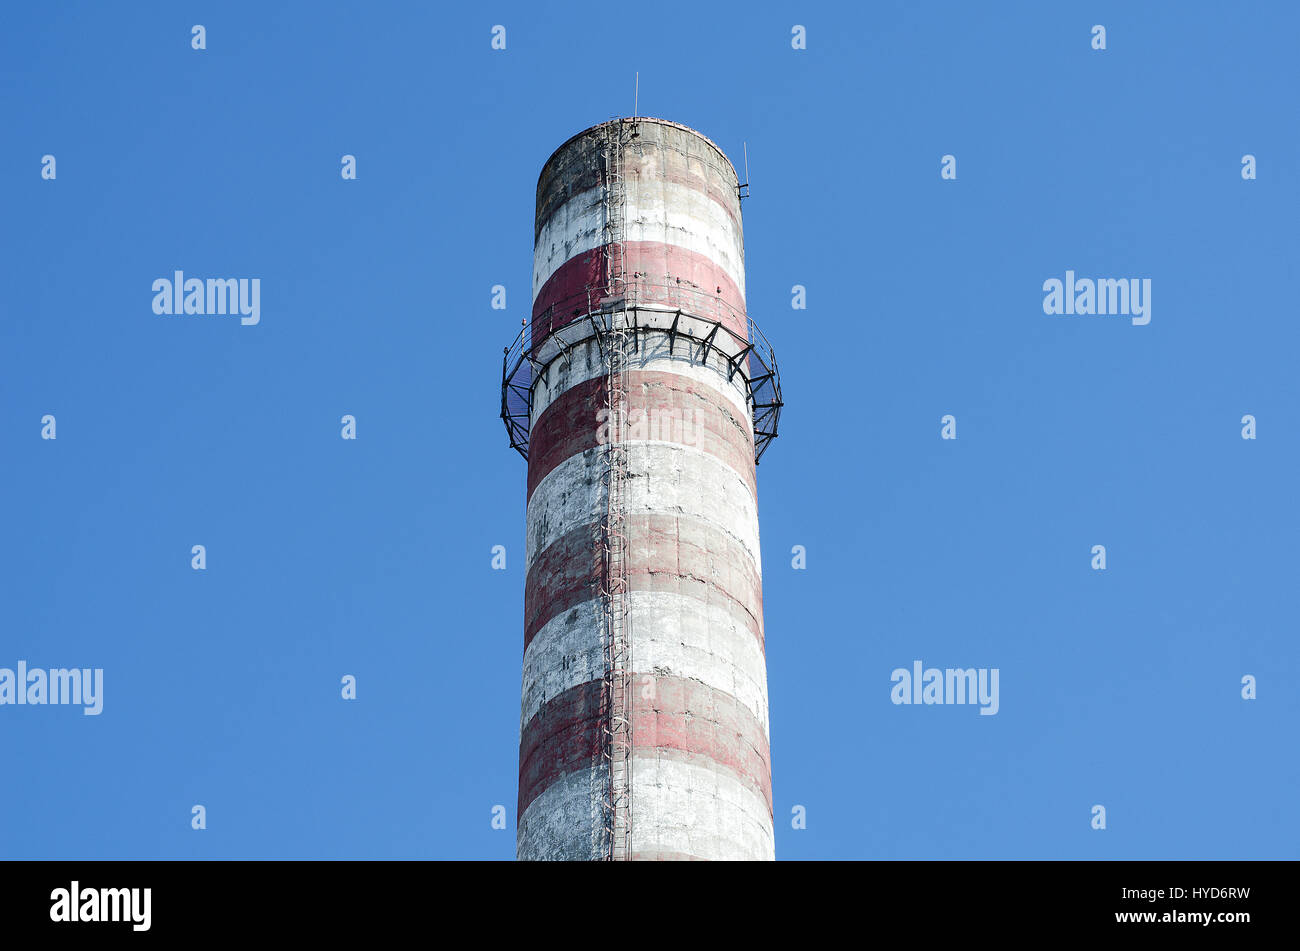 Industrial chimney against blue sky Stock Photo